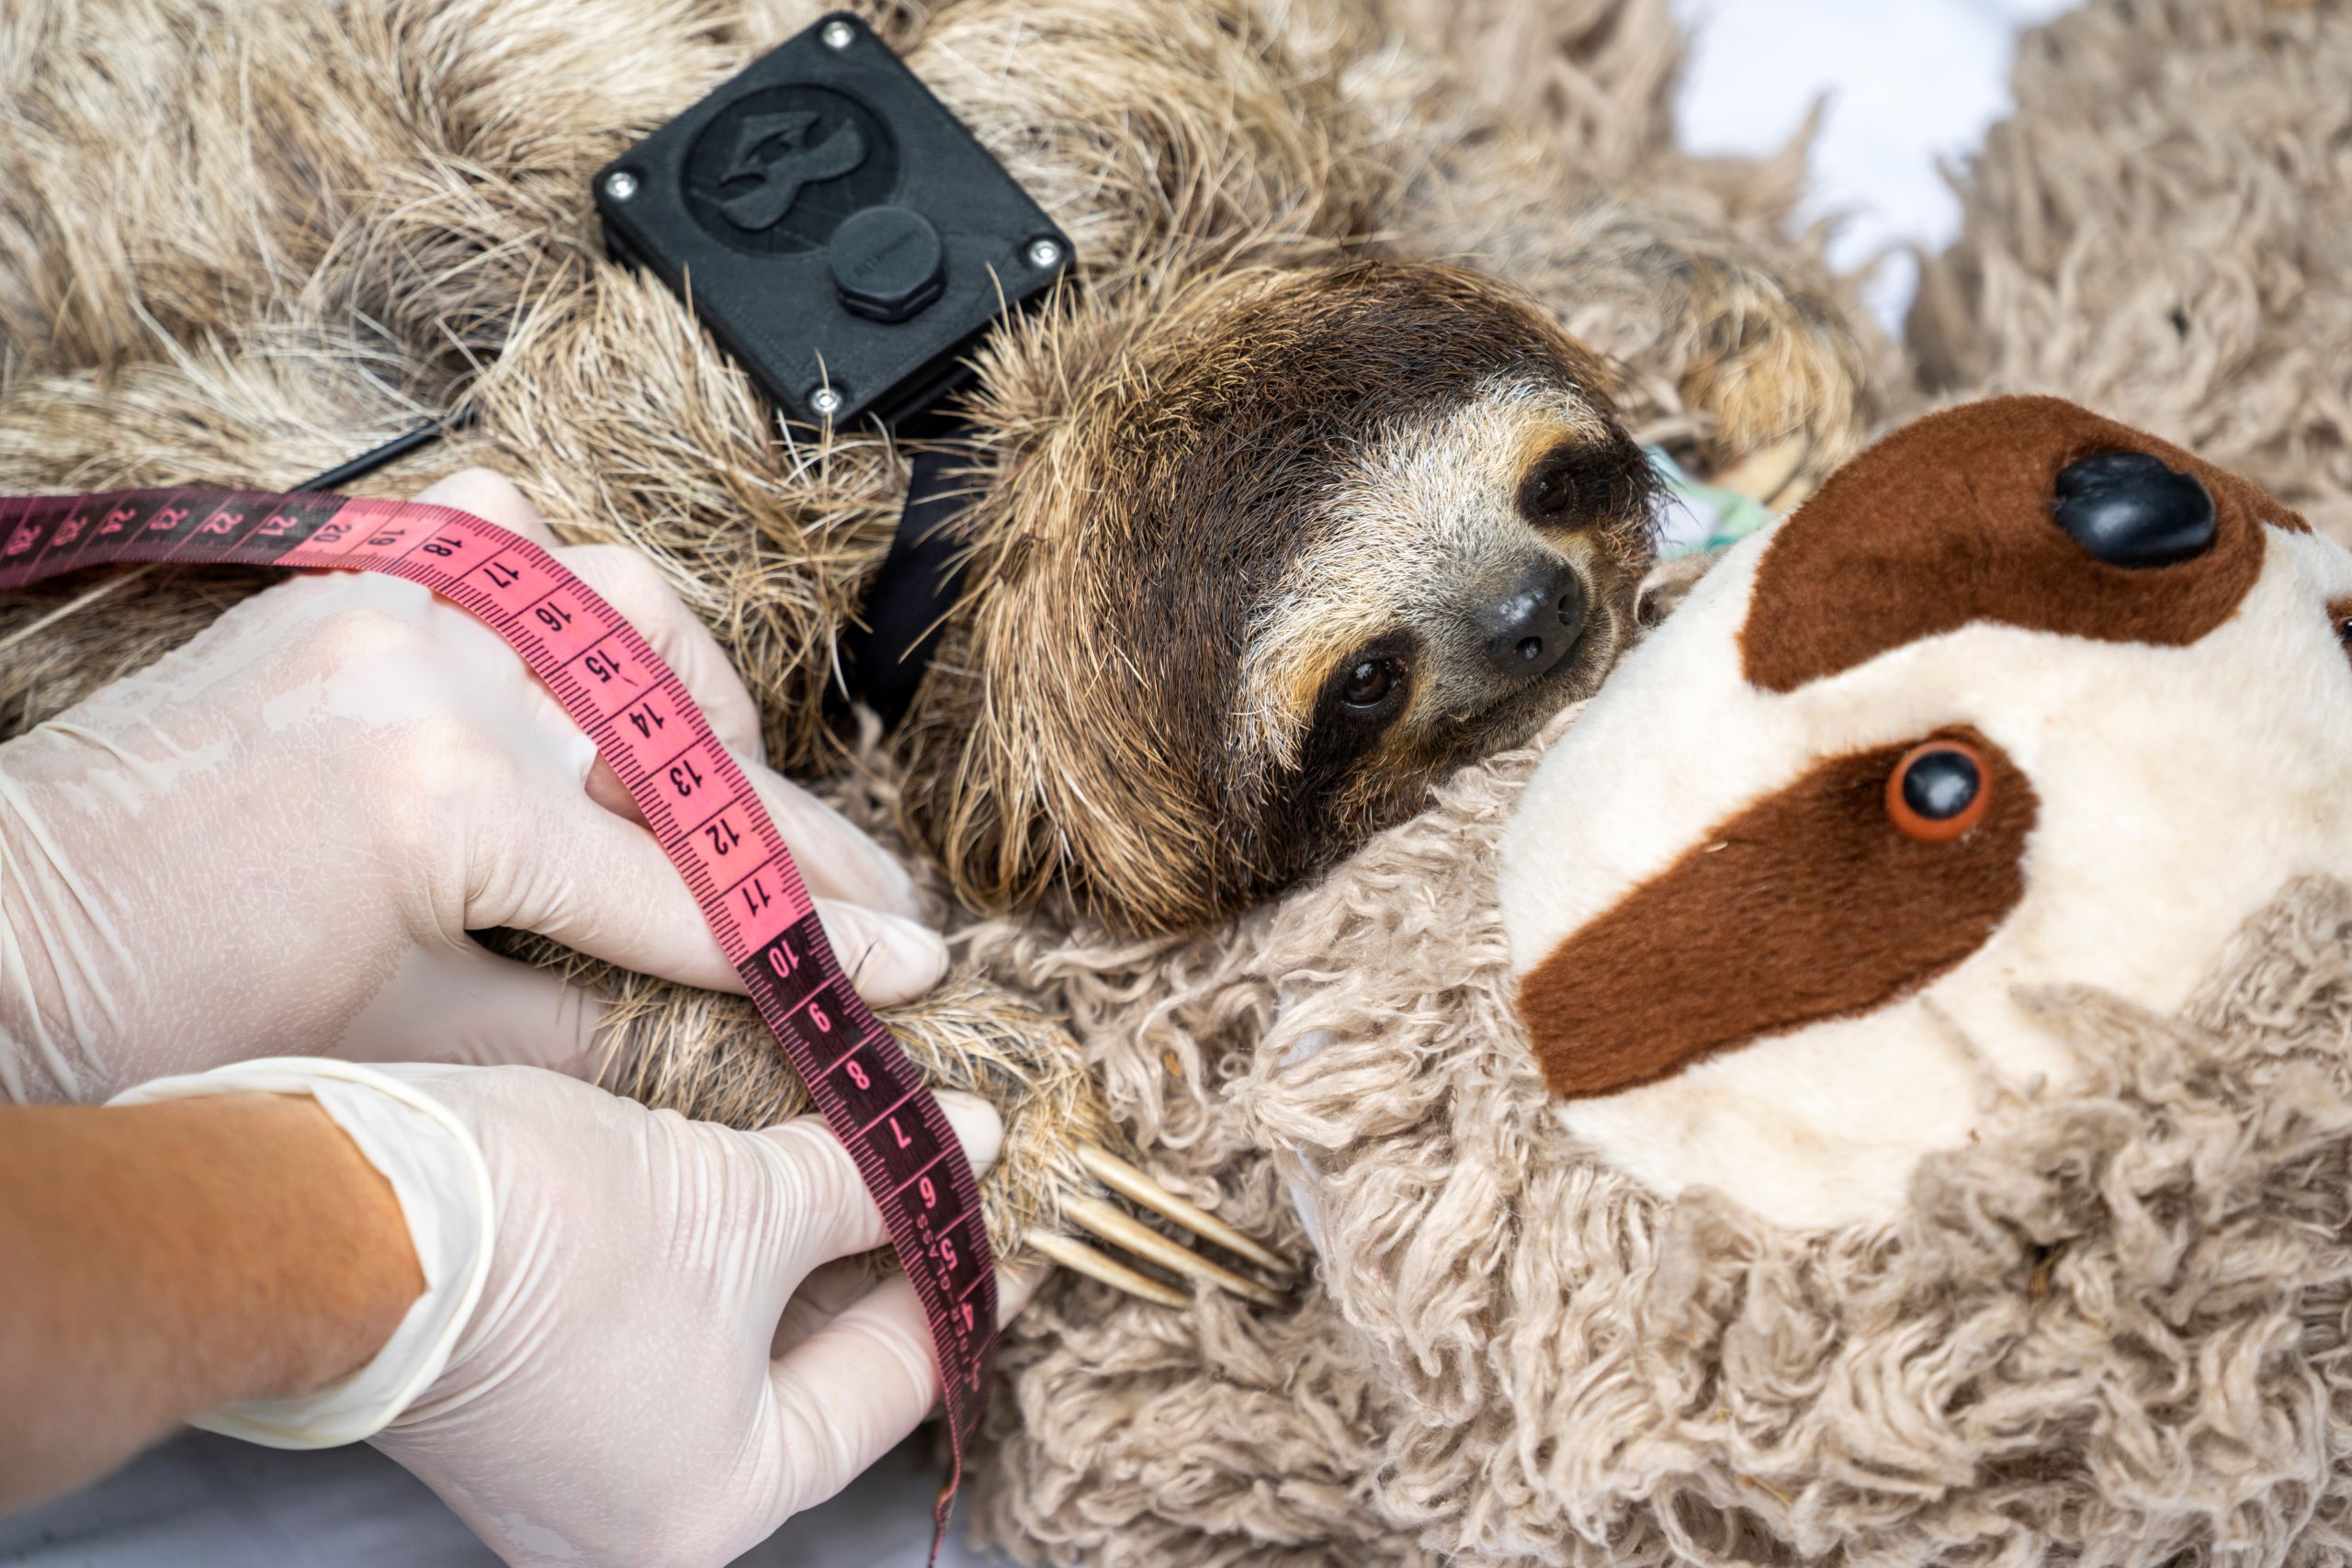 Slowly but surely: studying sloths - Future For Nature